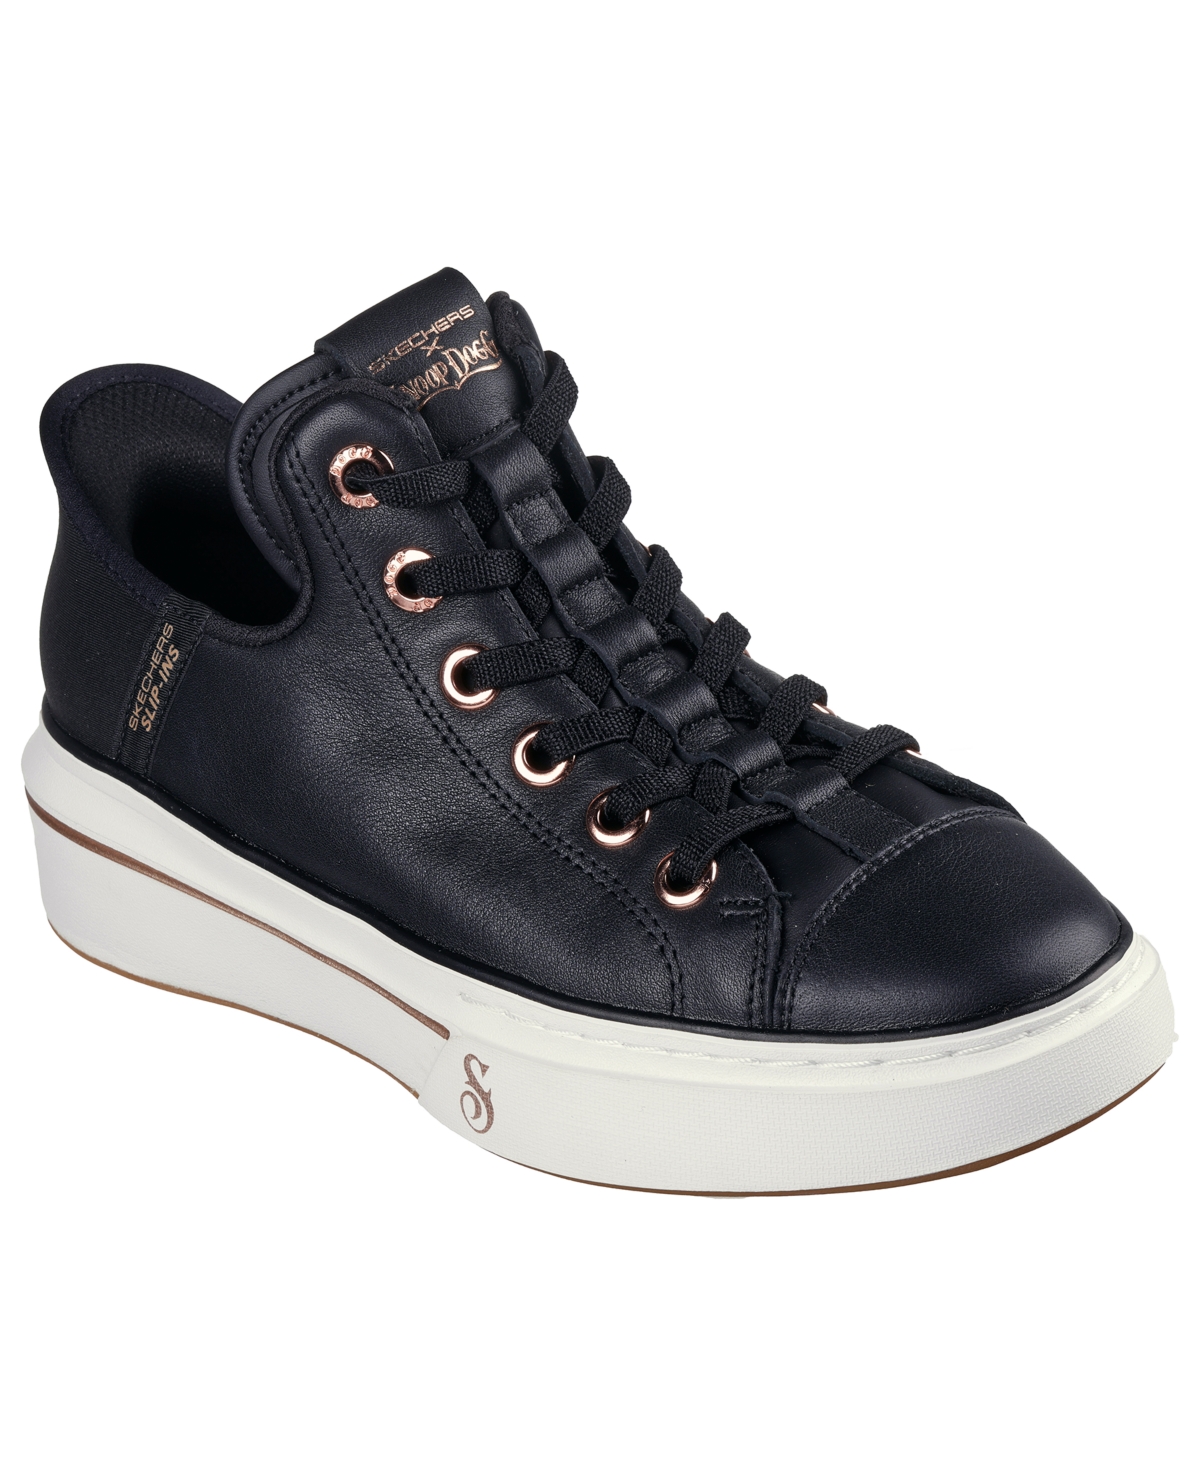 Women's Casual Sneakers from Finish Line - Black